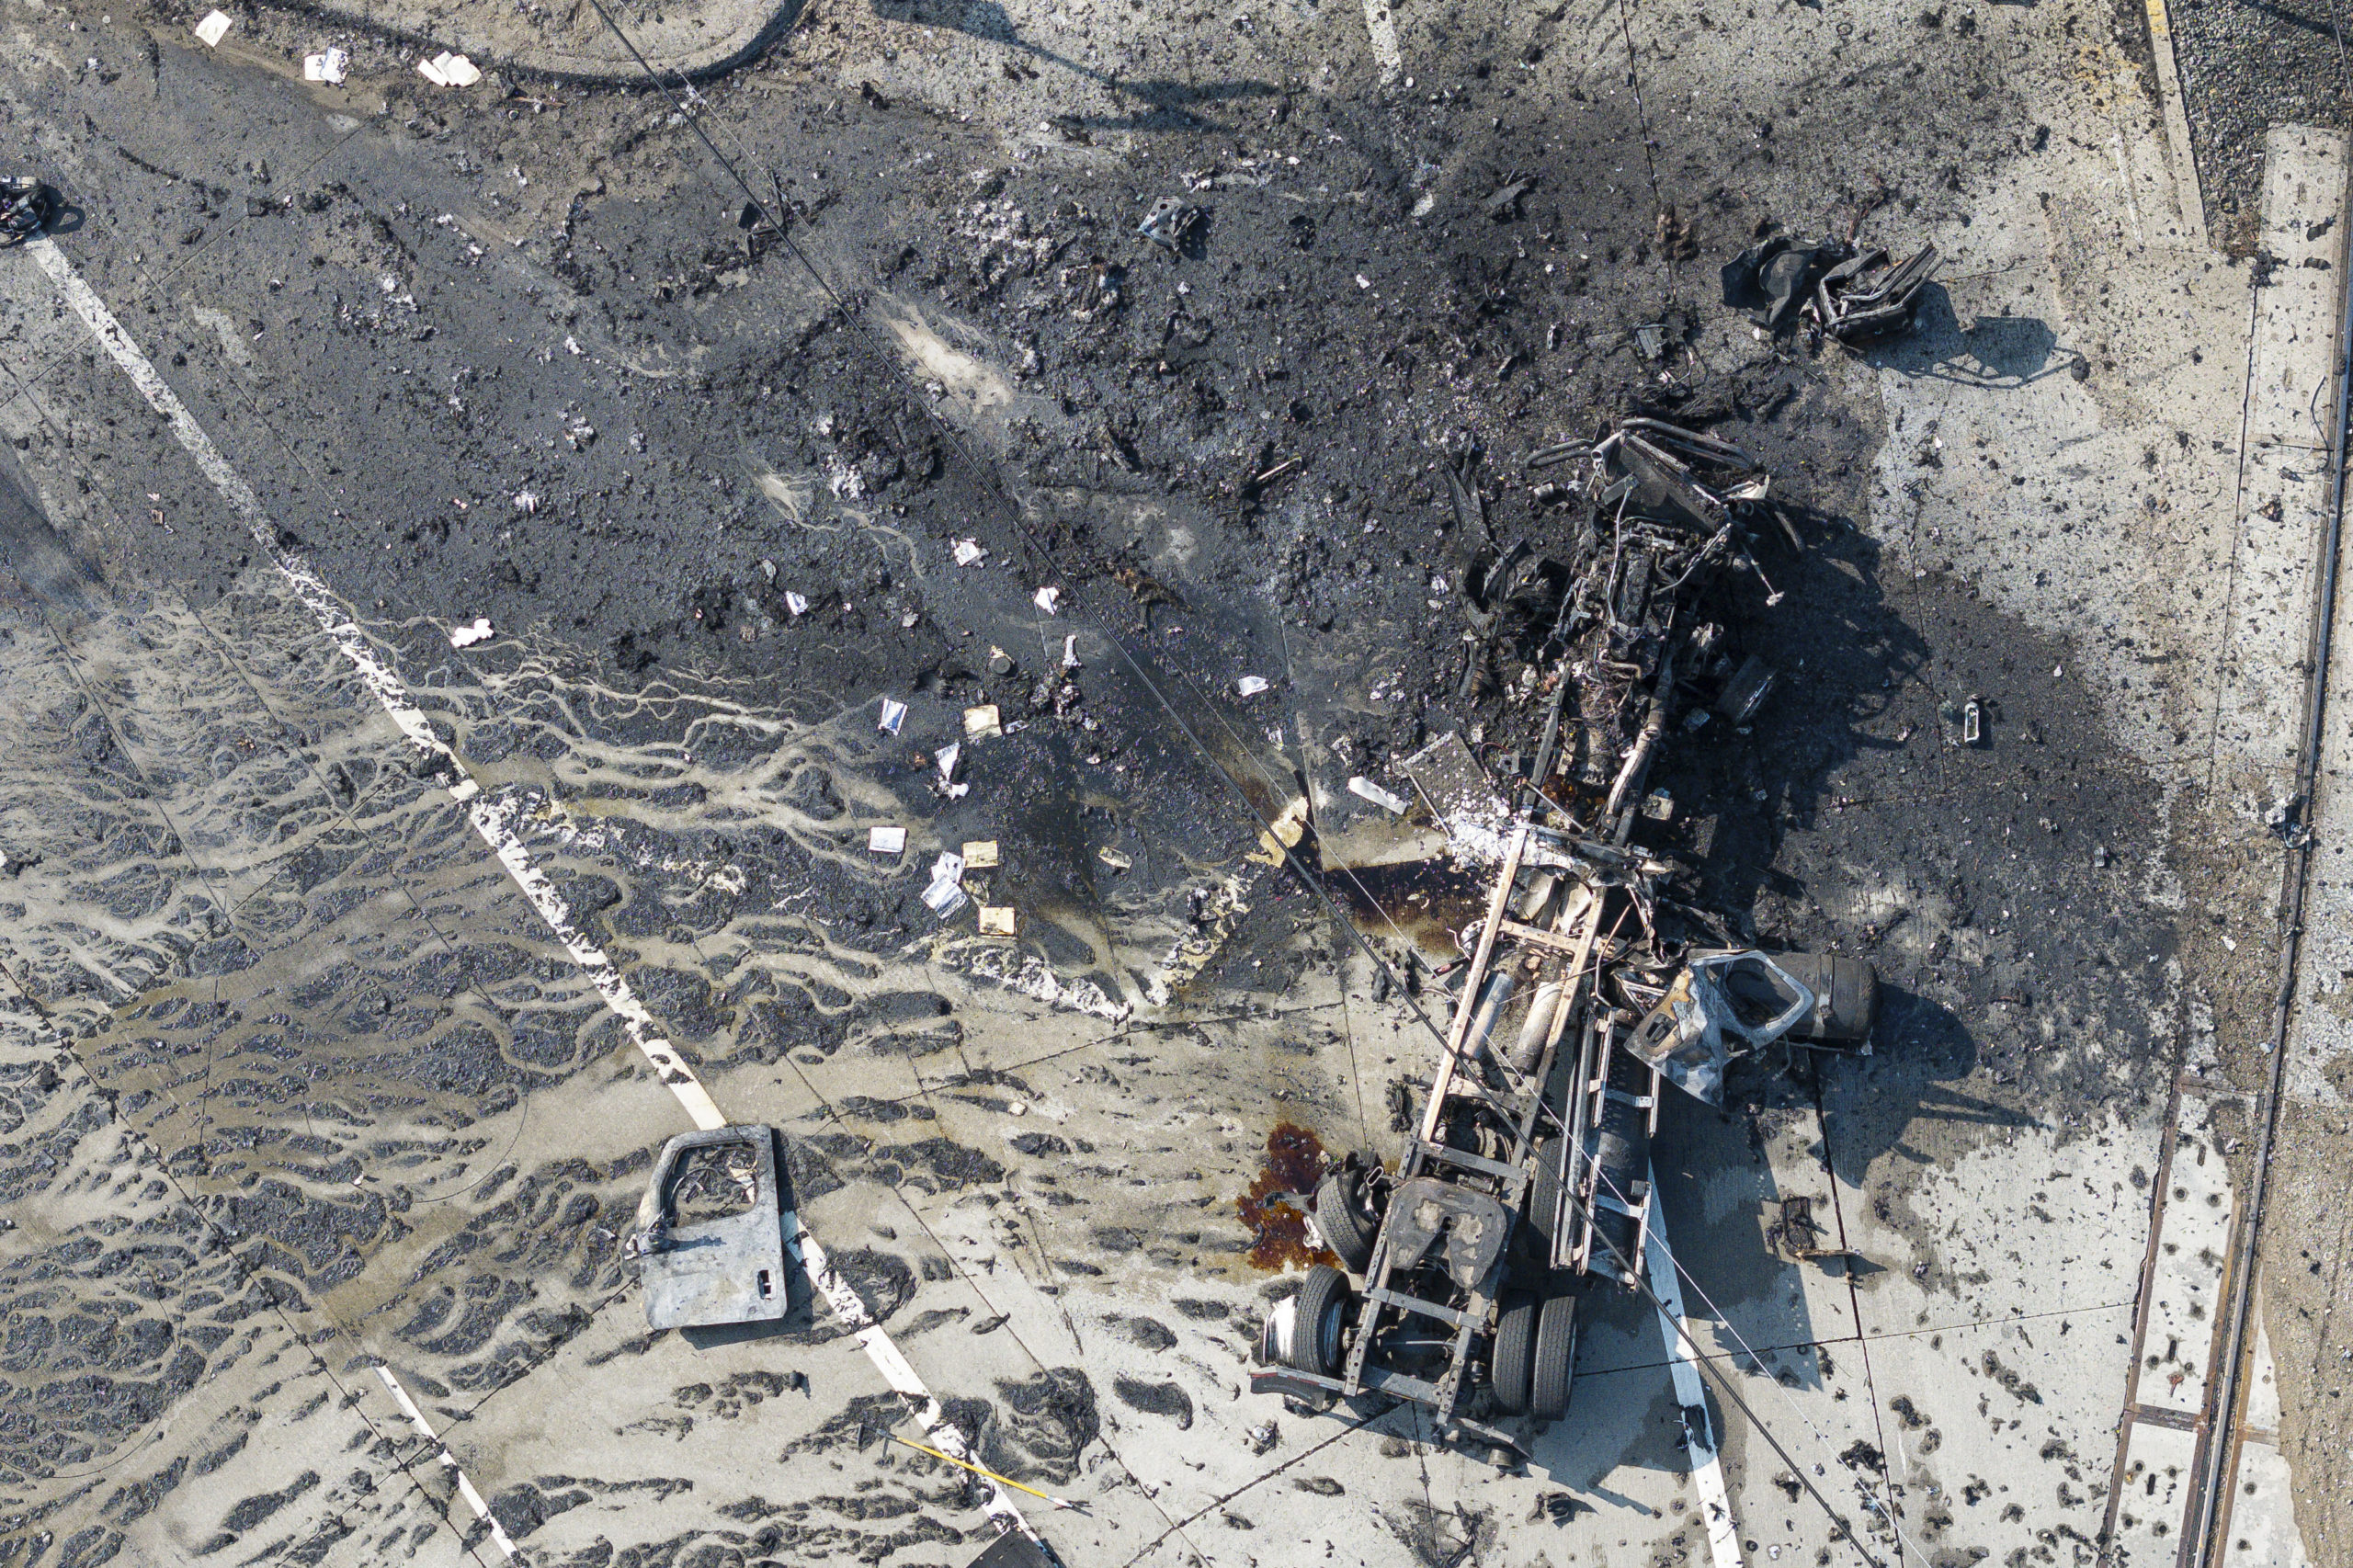 The tractor portion of a big rig is shown in an aerial view Thursday in the Wilmington section of Los Angeles. Several Los Angeles firefighters were injured, two critically, when an explosion occurred as they responded to a truck with pressurized cylinders that were on fire early that day.